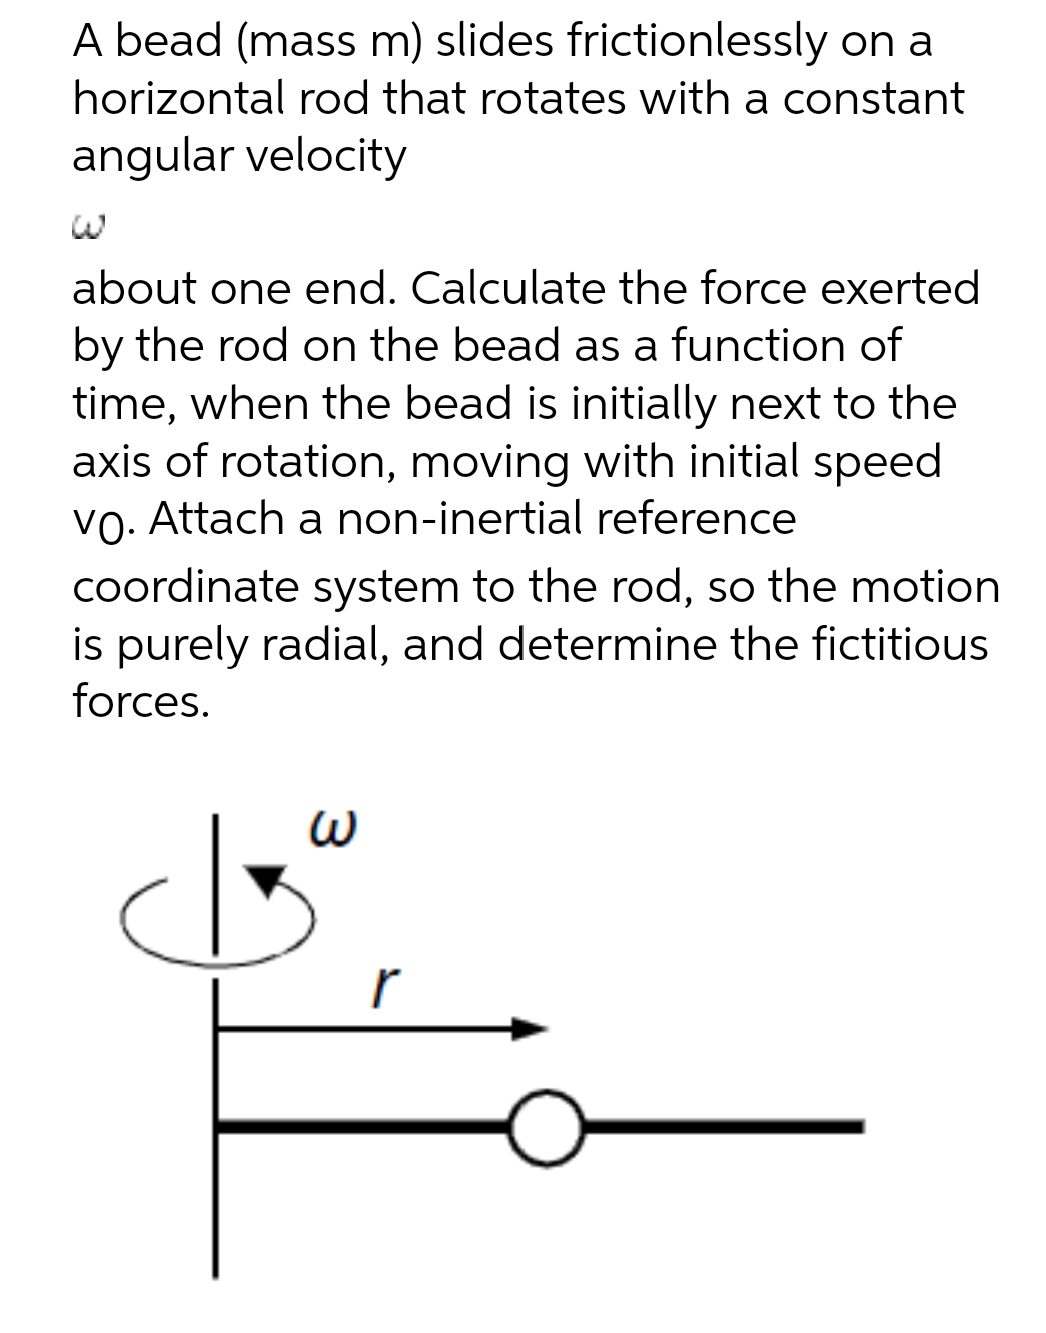 A bead (mass m) slides frictionlessly on a
horizontal rod that rotates with a constant
angular velocity
about one end. Calculate the force exerted
by the rod on the bead as a function of
time, when the bead is initially next to the
axis of rotation, moving with initial speed
vo. Attach a non-inertial reference
coordinate system to the rod, so the motion
is purely radial, and determine the fictitious
forces.